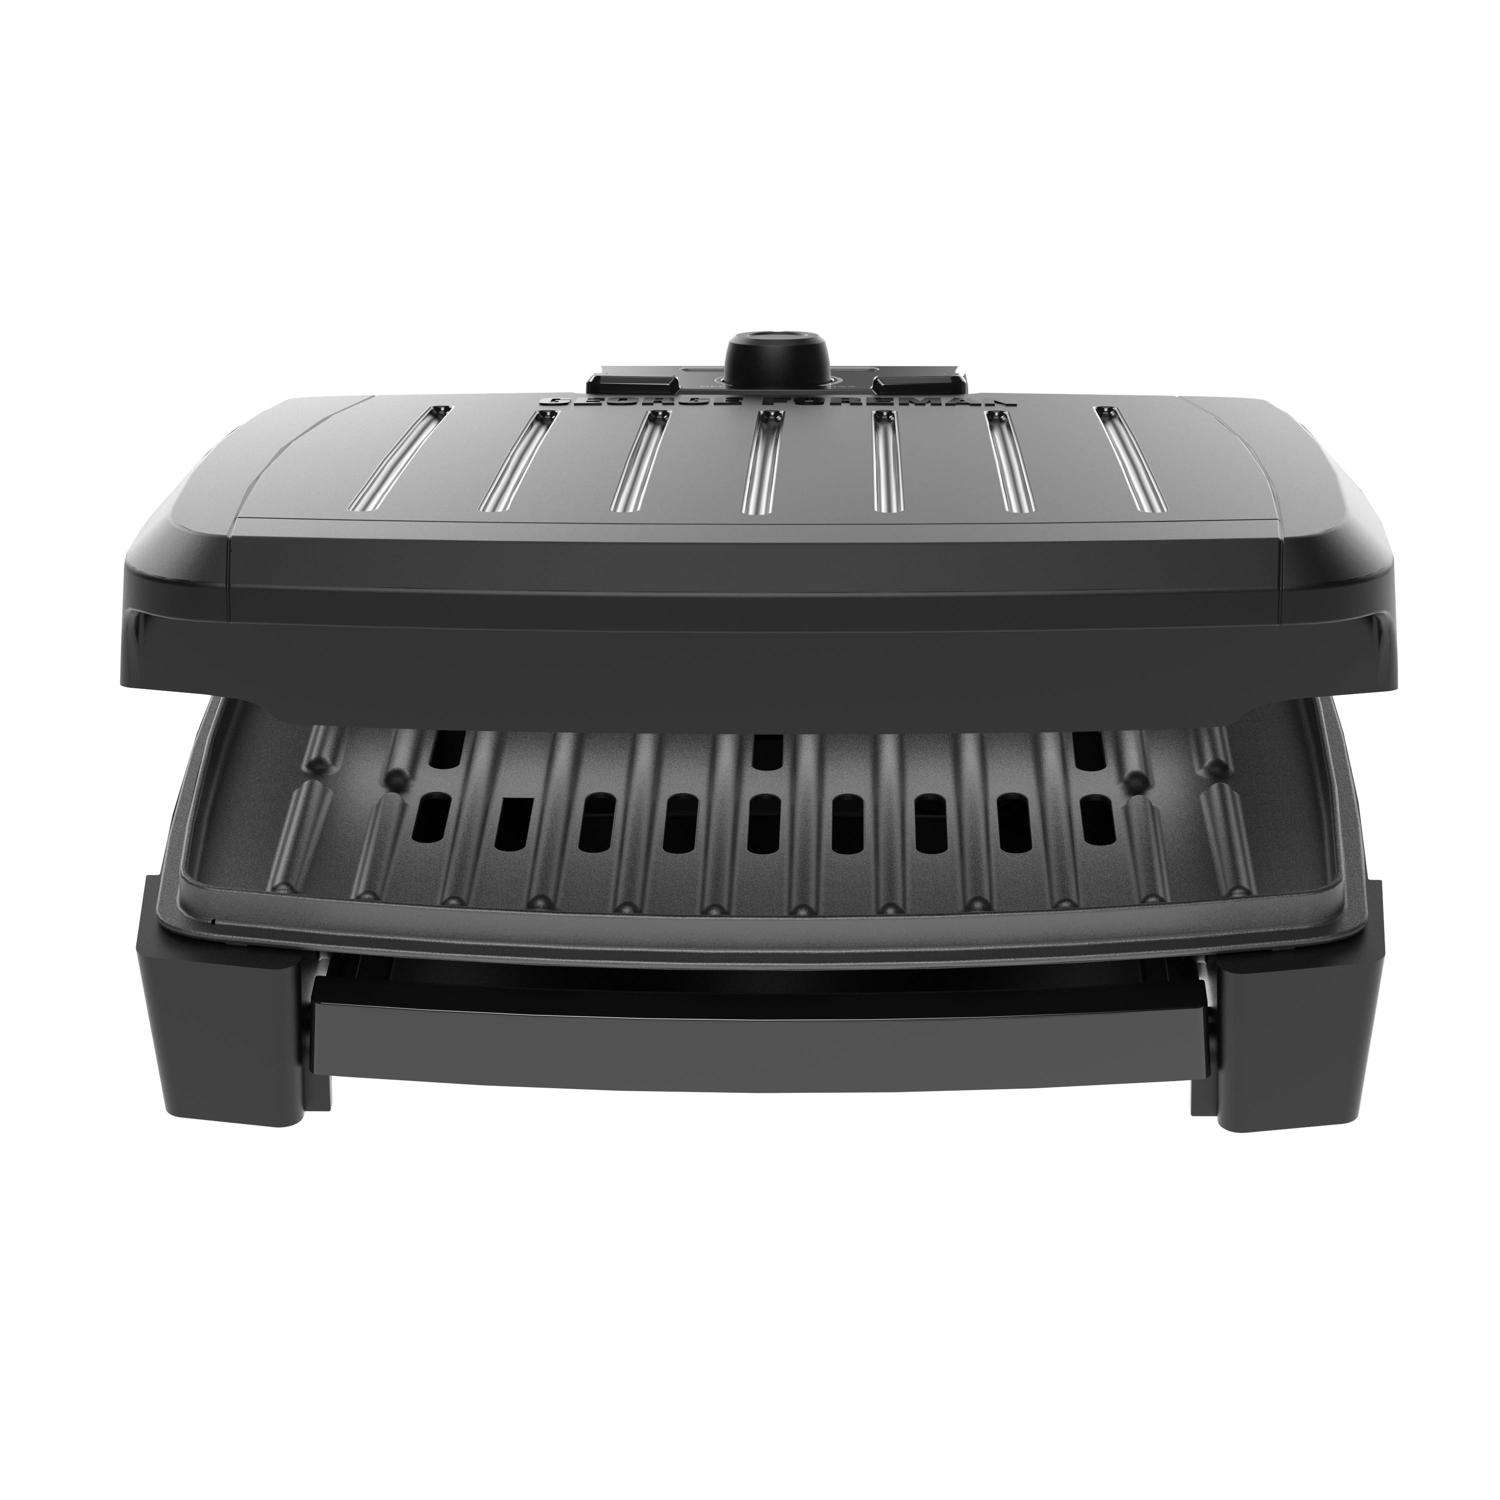 George Foreman Electric Grilling Grill - appliances - by owner